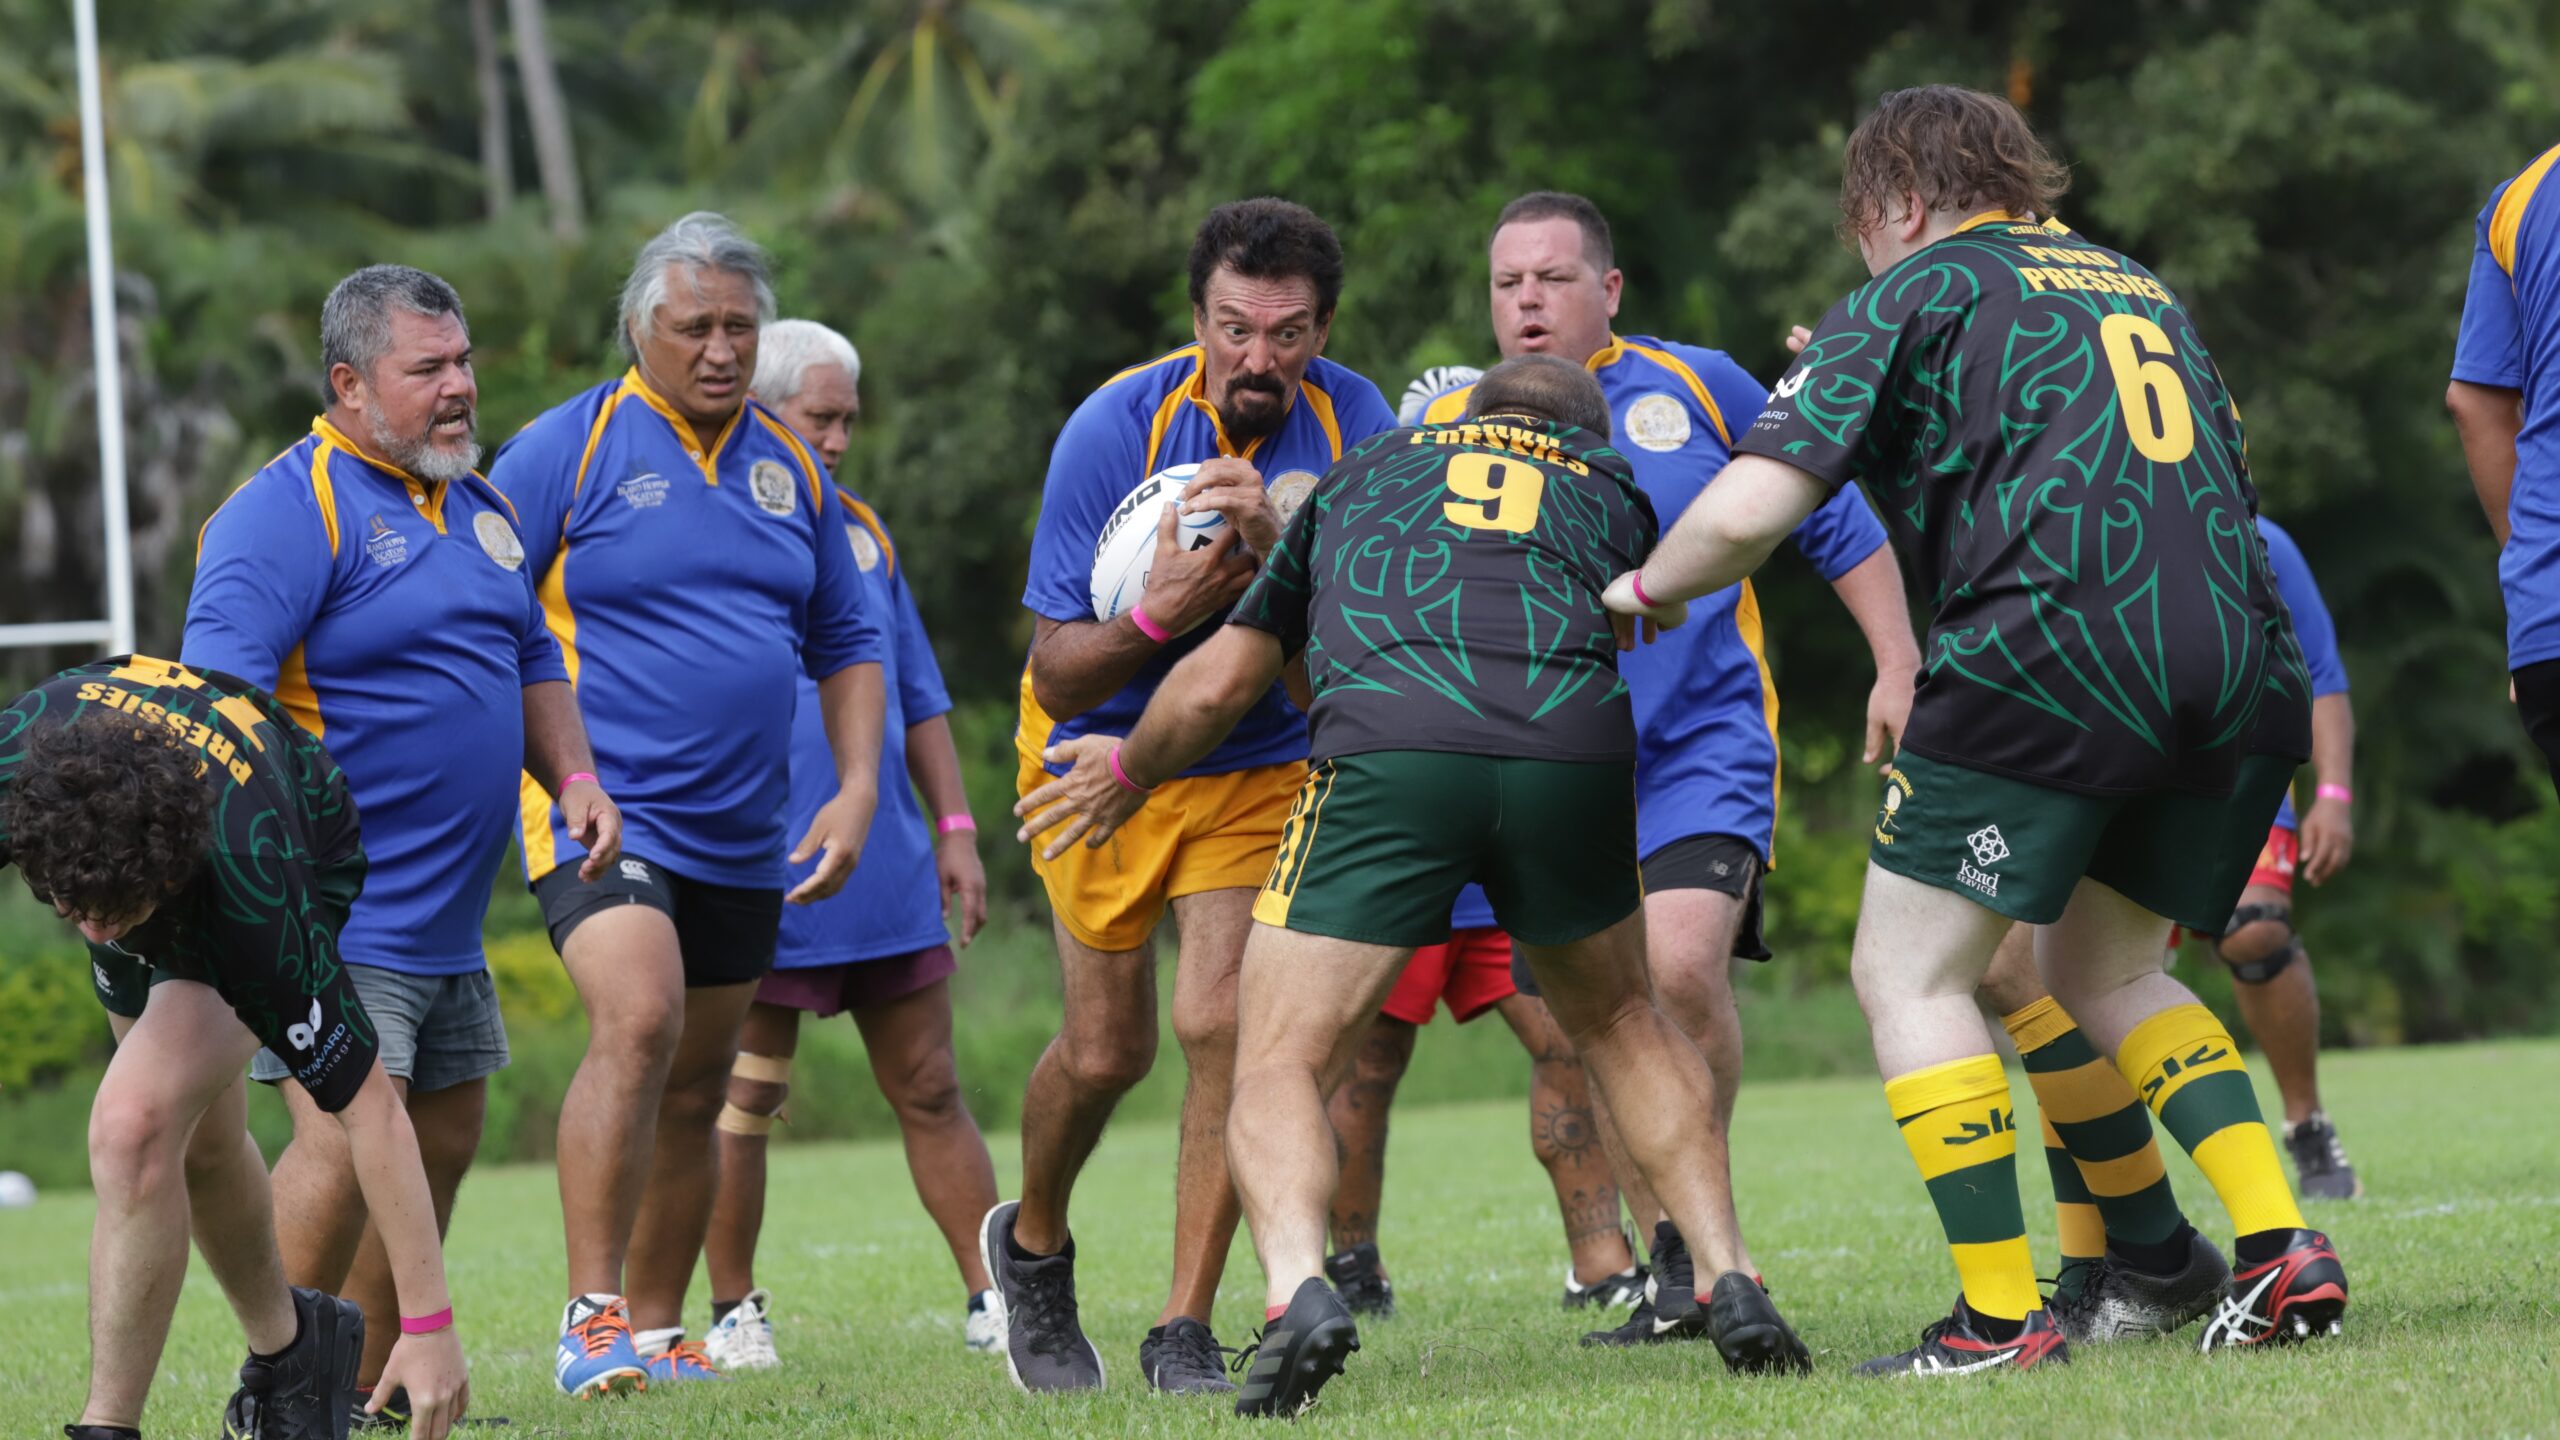 Golden Oldies show their style on the rugby field